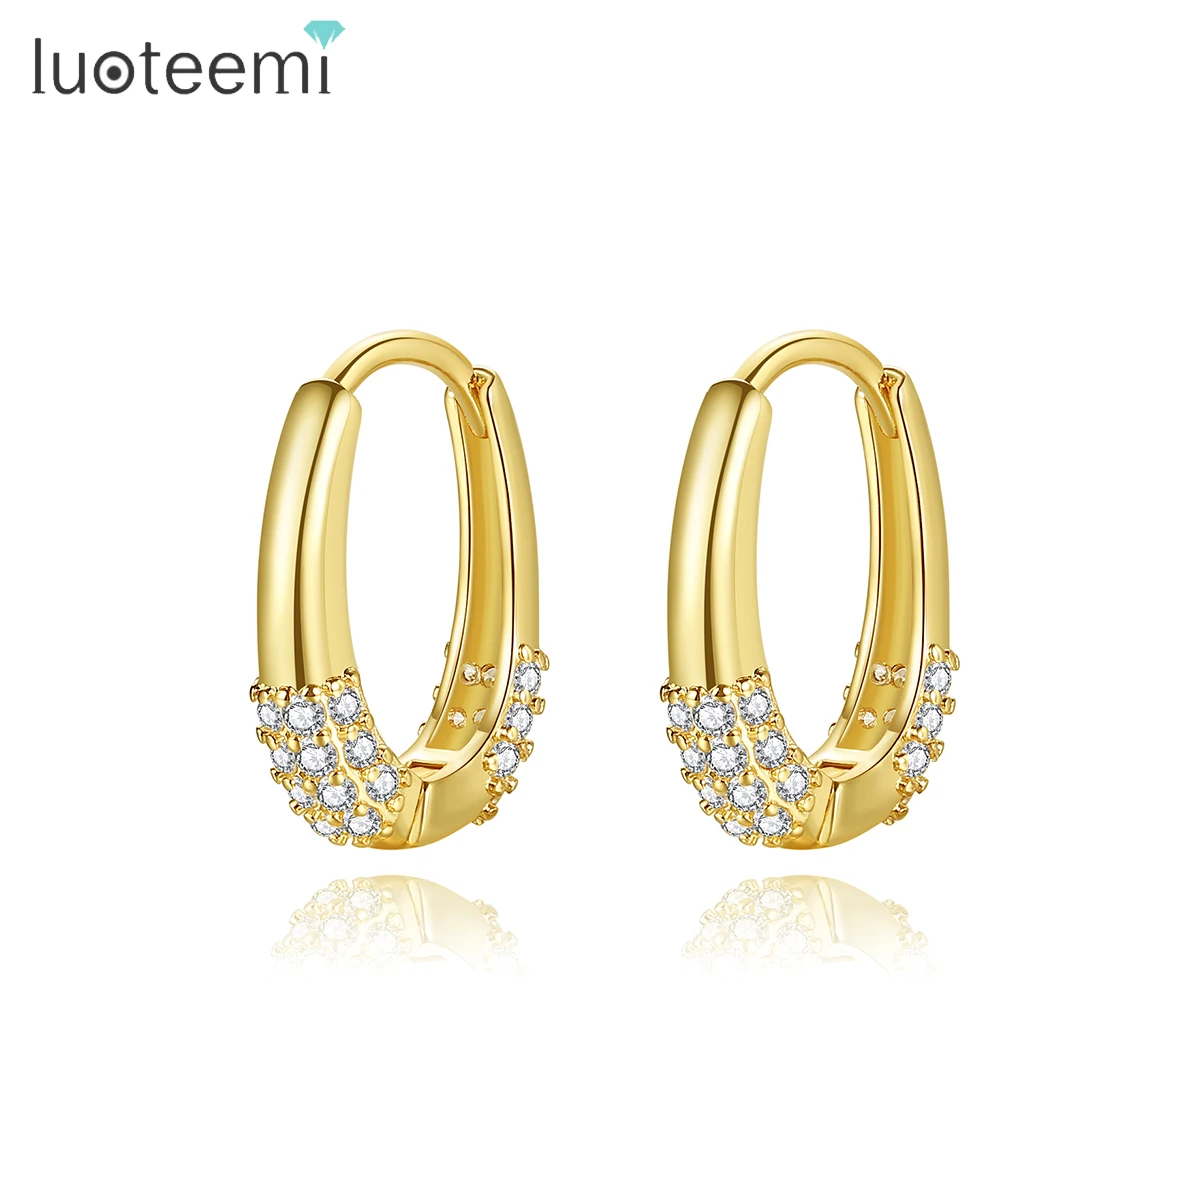 

LUOTEEMI Jewelry 18K Gold Plated Pave Dainty Statement Pave Cubic Zirconia CZ Crystals Huggie Hoop Earrings